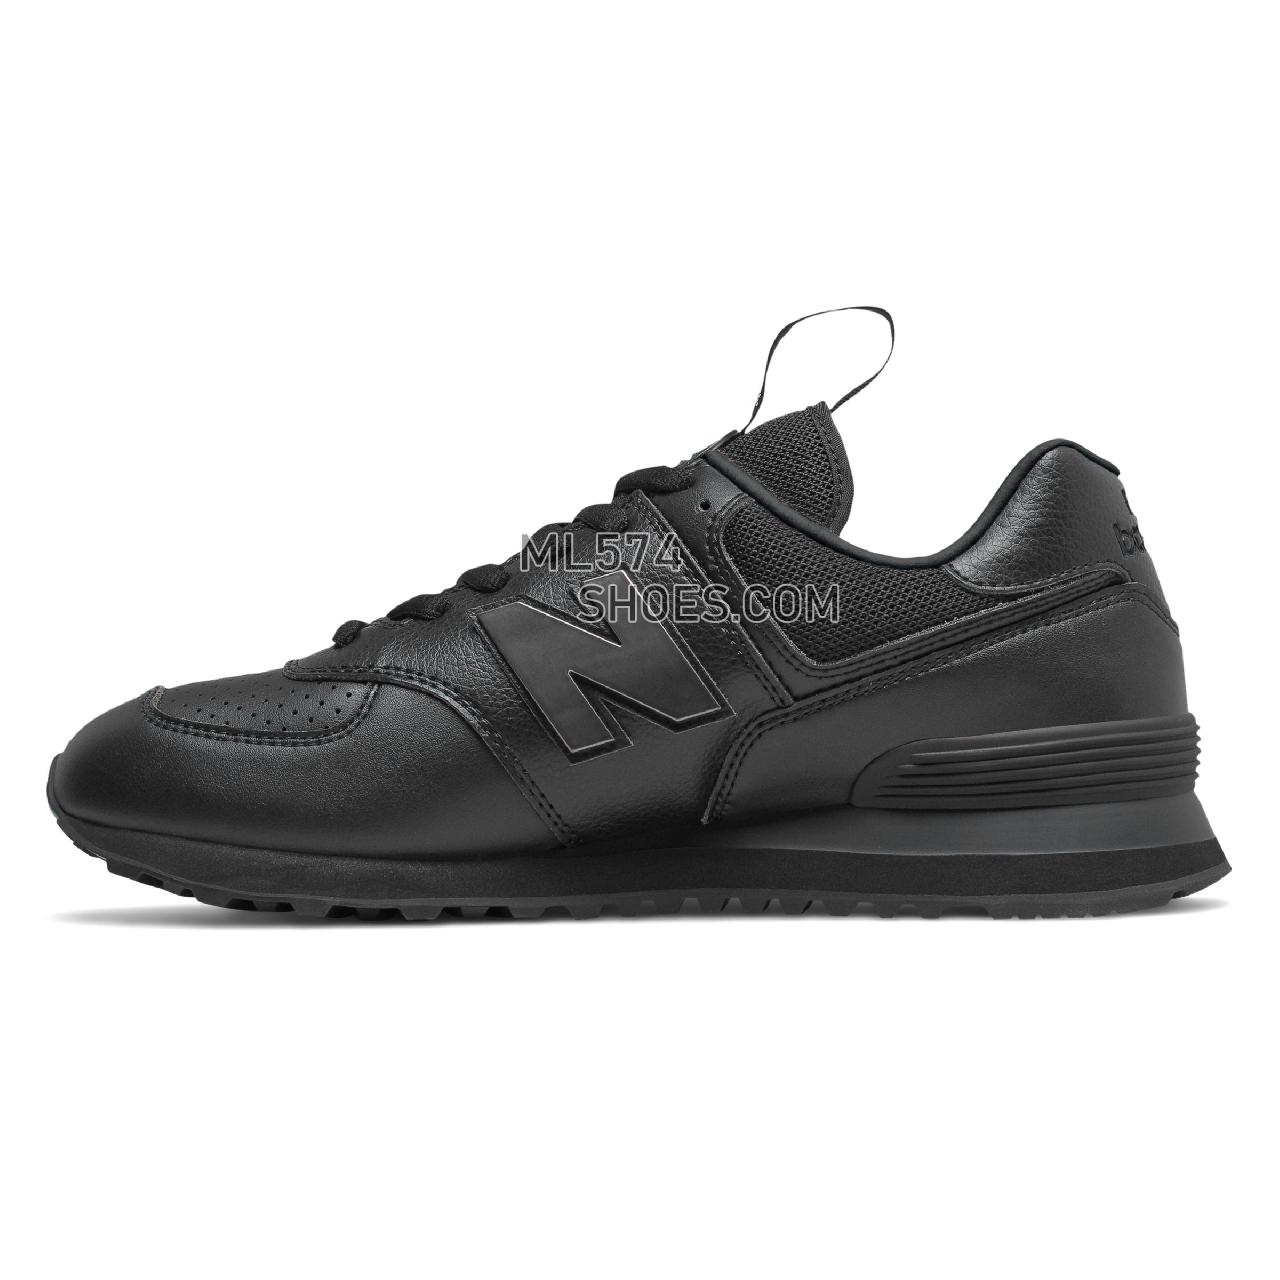 New Balance 574 - Men's Classic Sneakers - Black with Black Caviar - ML574SOW